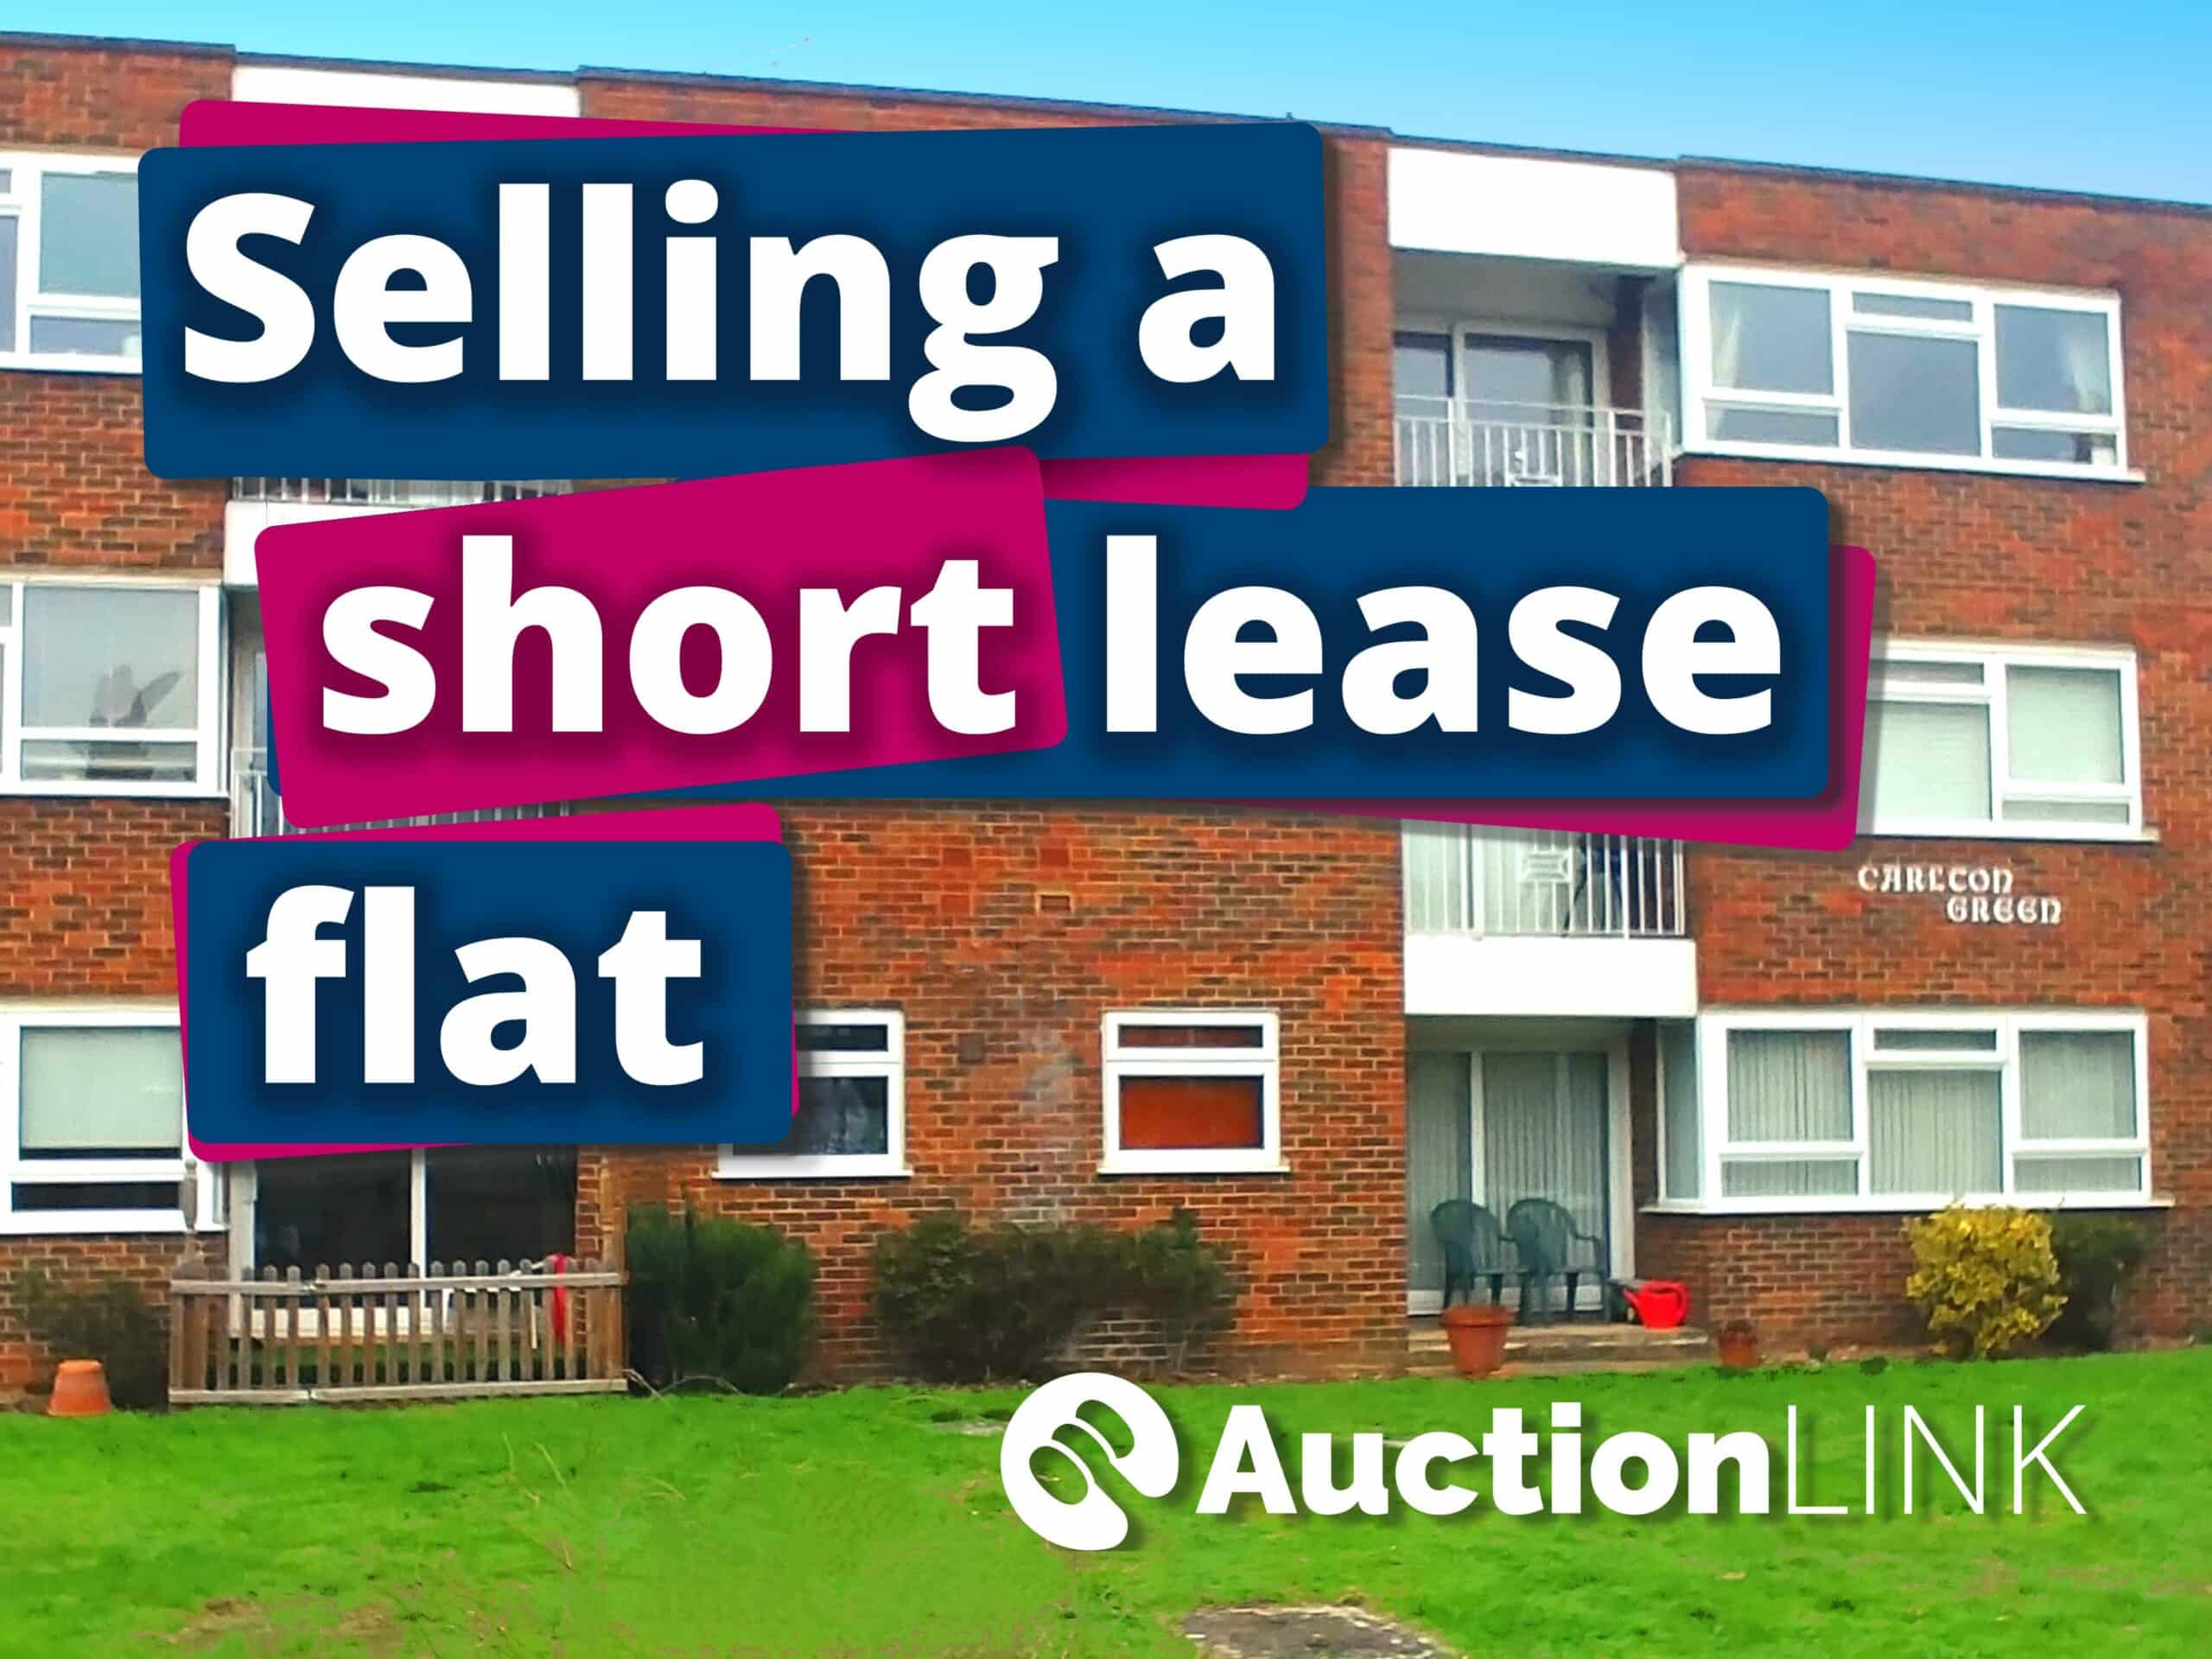 selling a short lease flat - auction